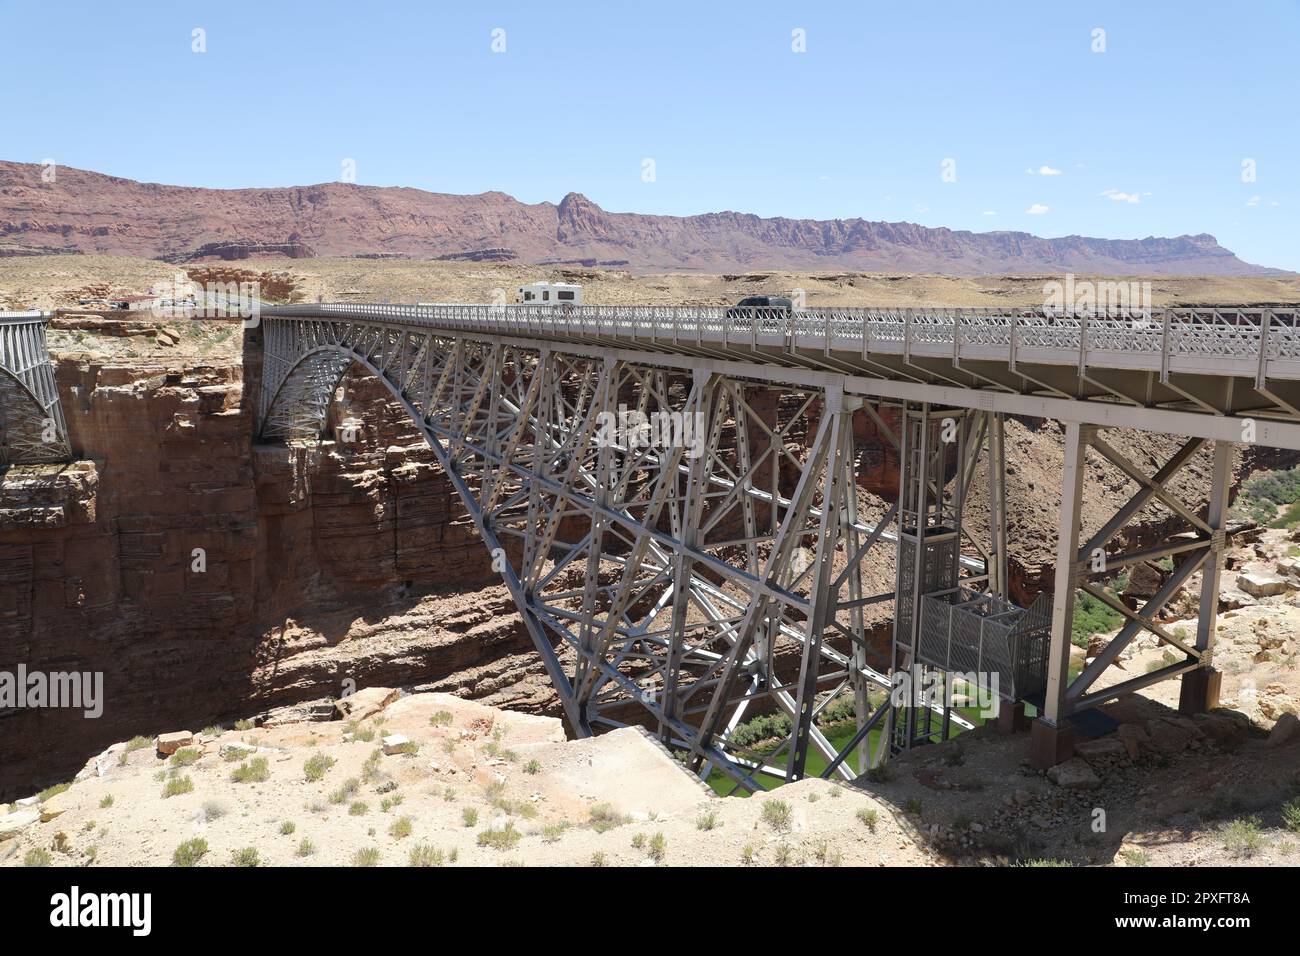 The modern Navajo bridge over the Colorado river in northern Coconino County, Arizona U.S.A. on US Highway 89A between Bitter Springs & Jacob Lake Stock Photo